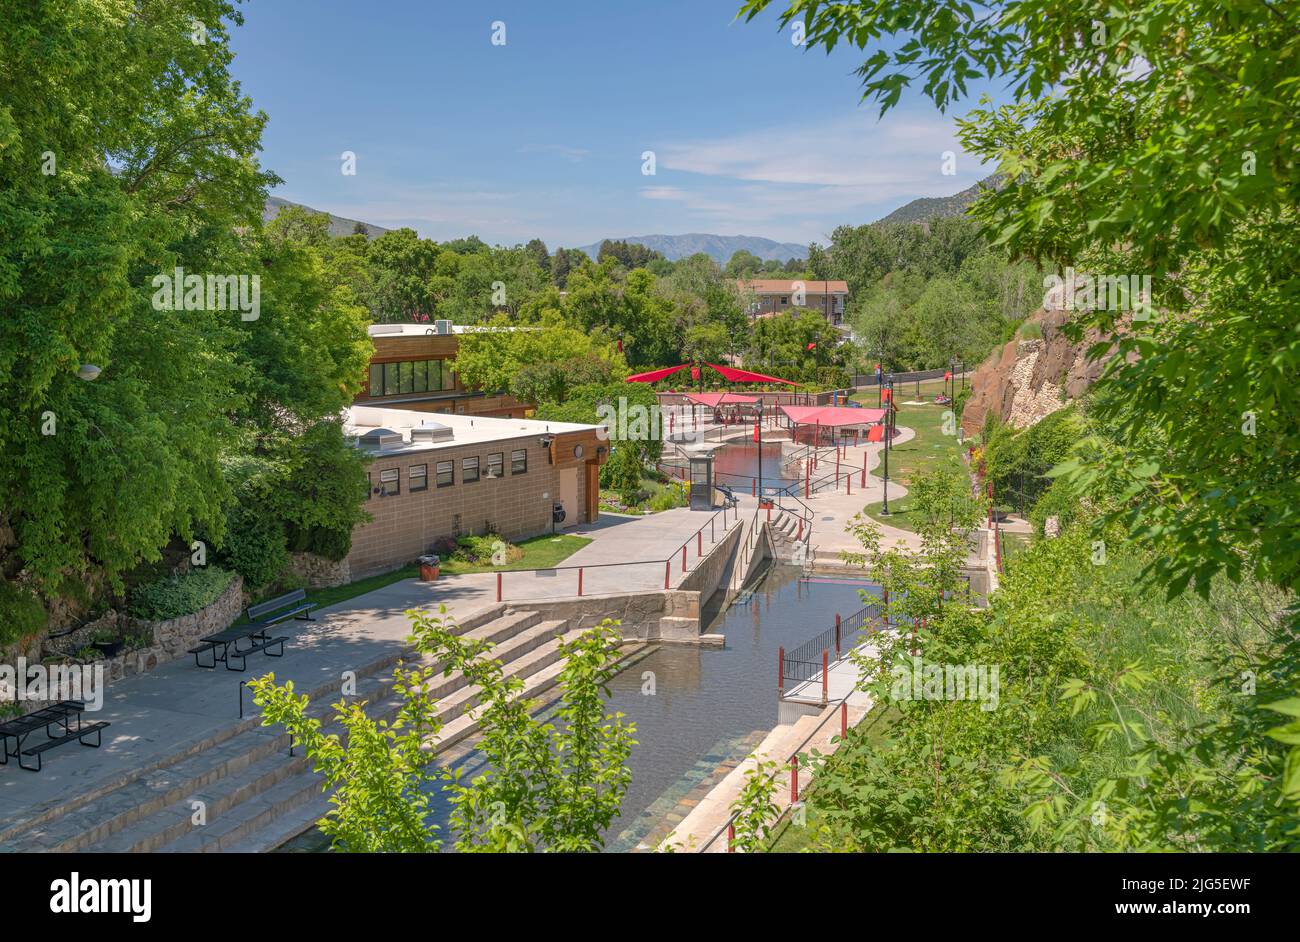 Lava Hot Spring resort and spa in Idaho state. Stock Photo